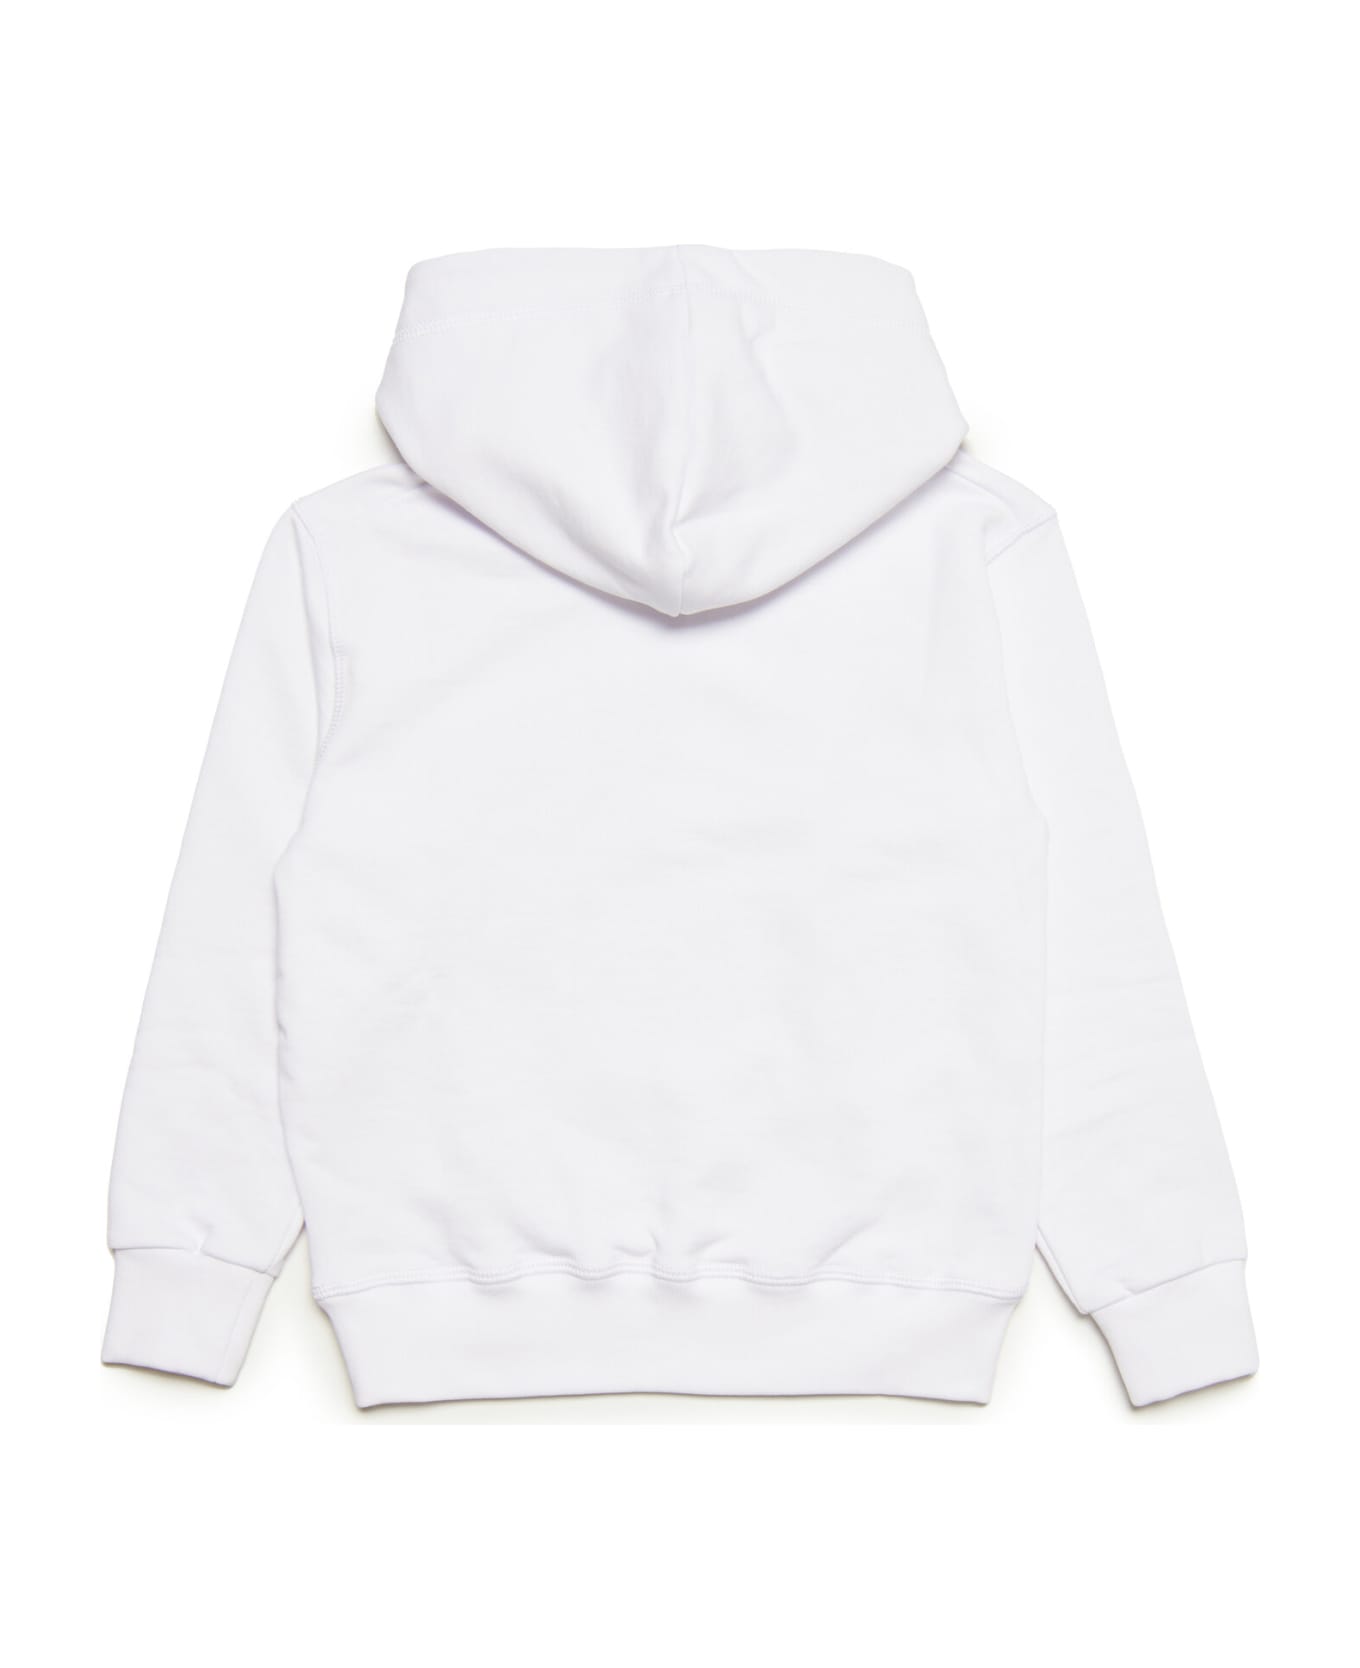 Dsquared2 D2s666u Cool Fit-icon Sweat-shirt Dsquared White Cotton Hooded Sweatshirt With Icon Logo - White